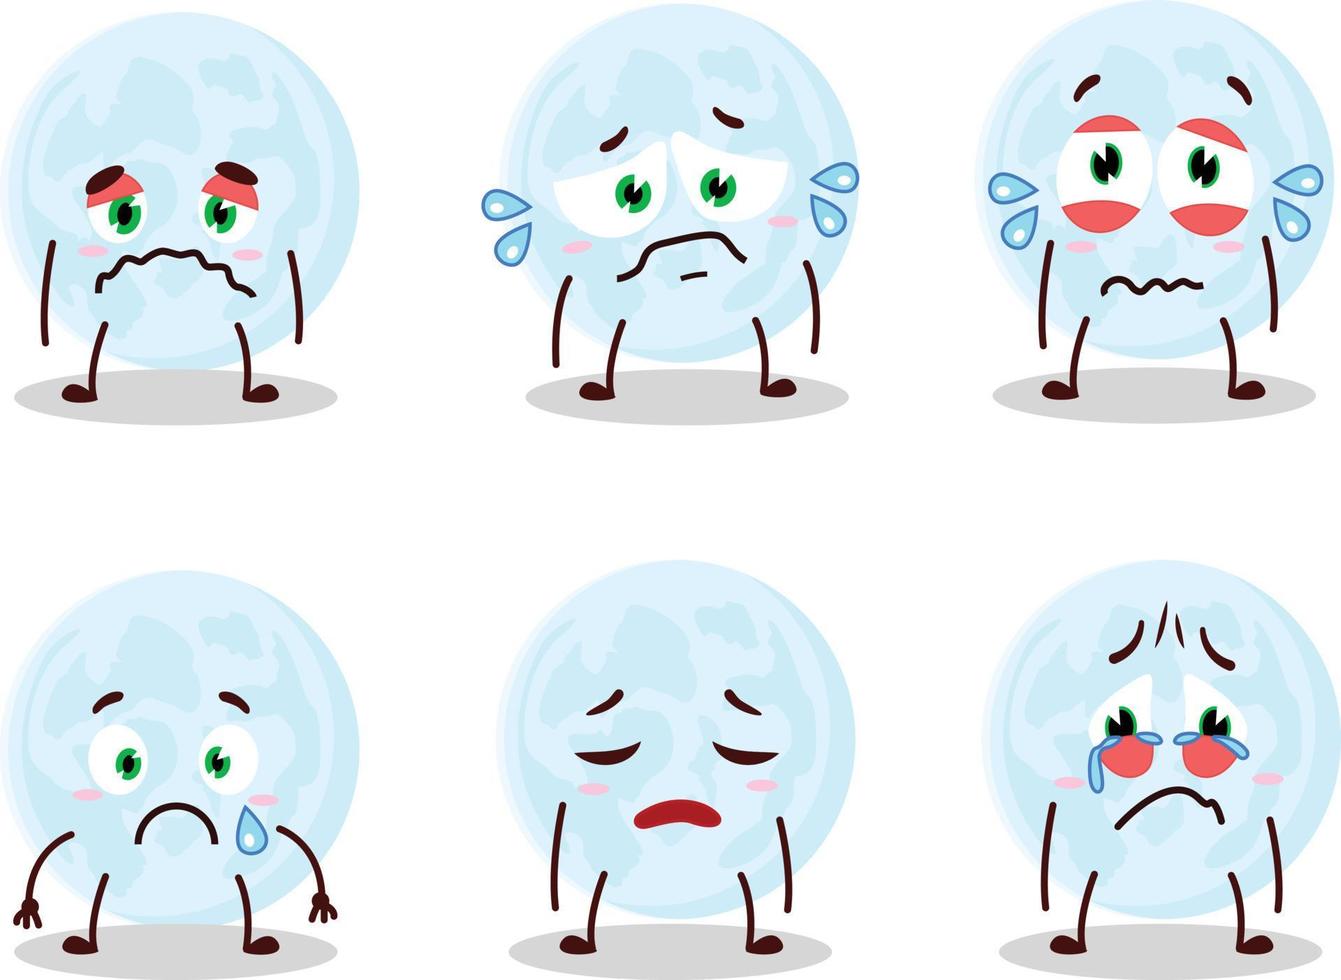 Blue moon cartoon character with sad expression vector